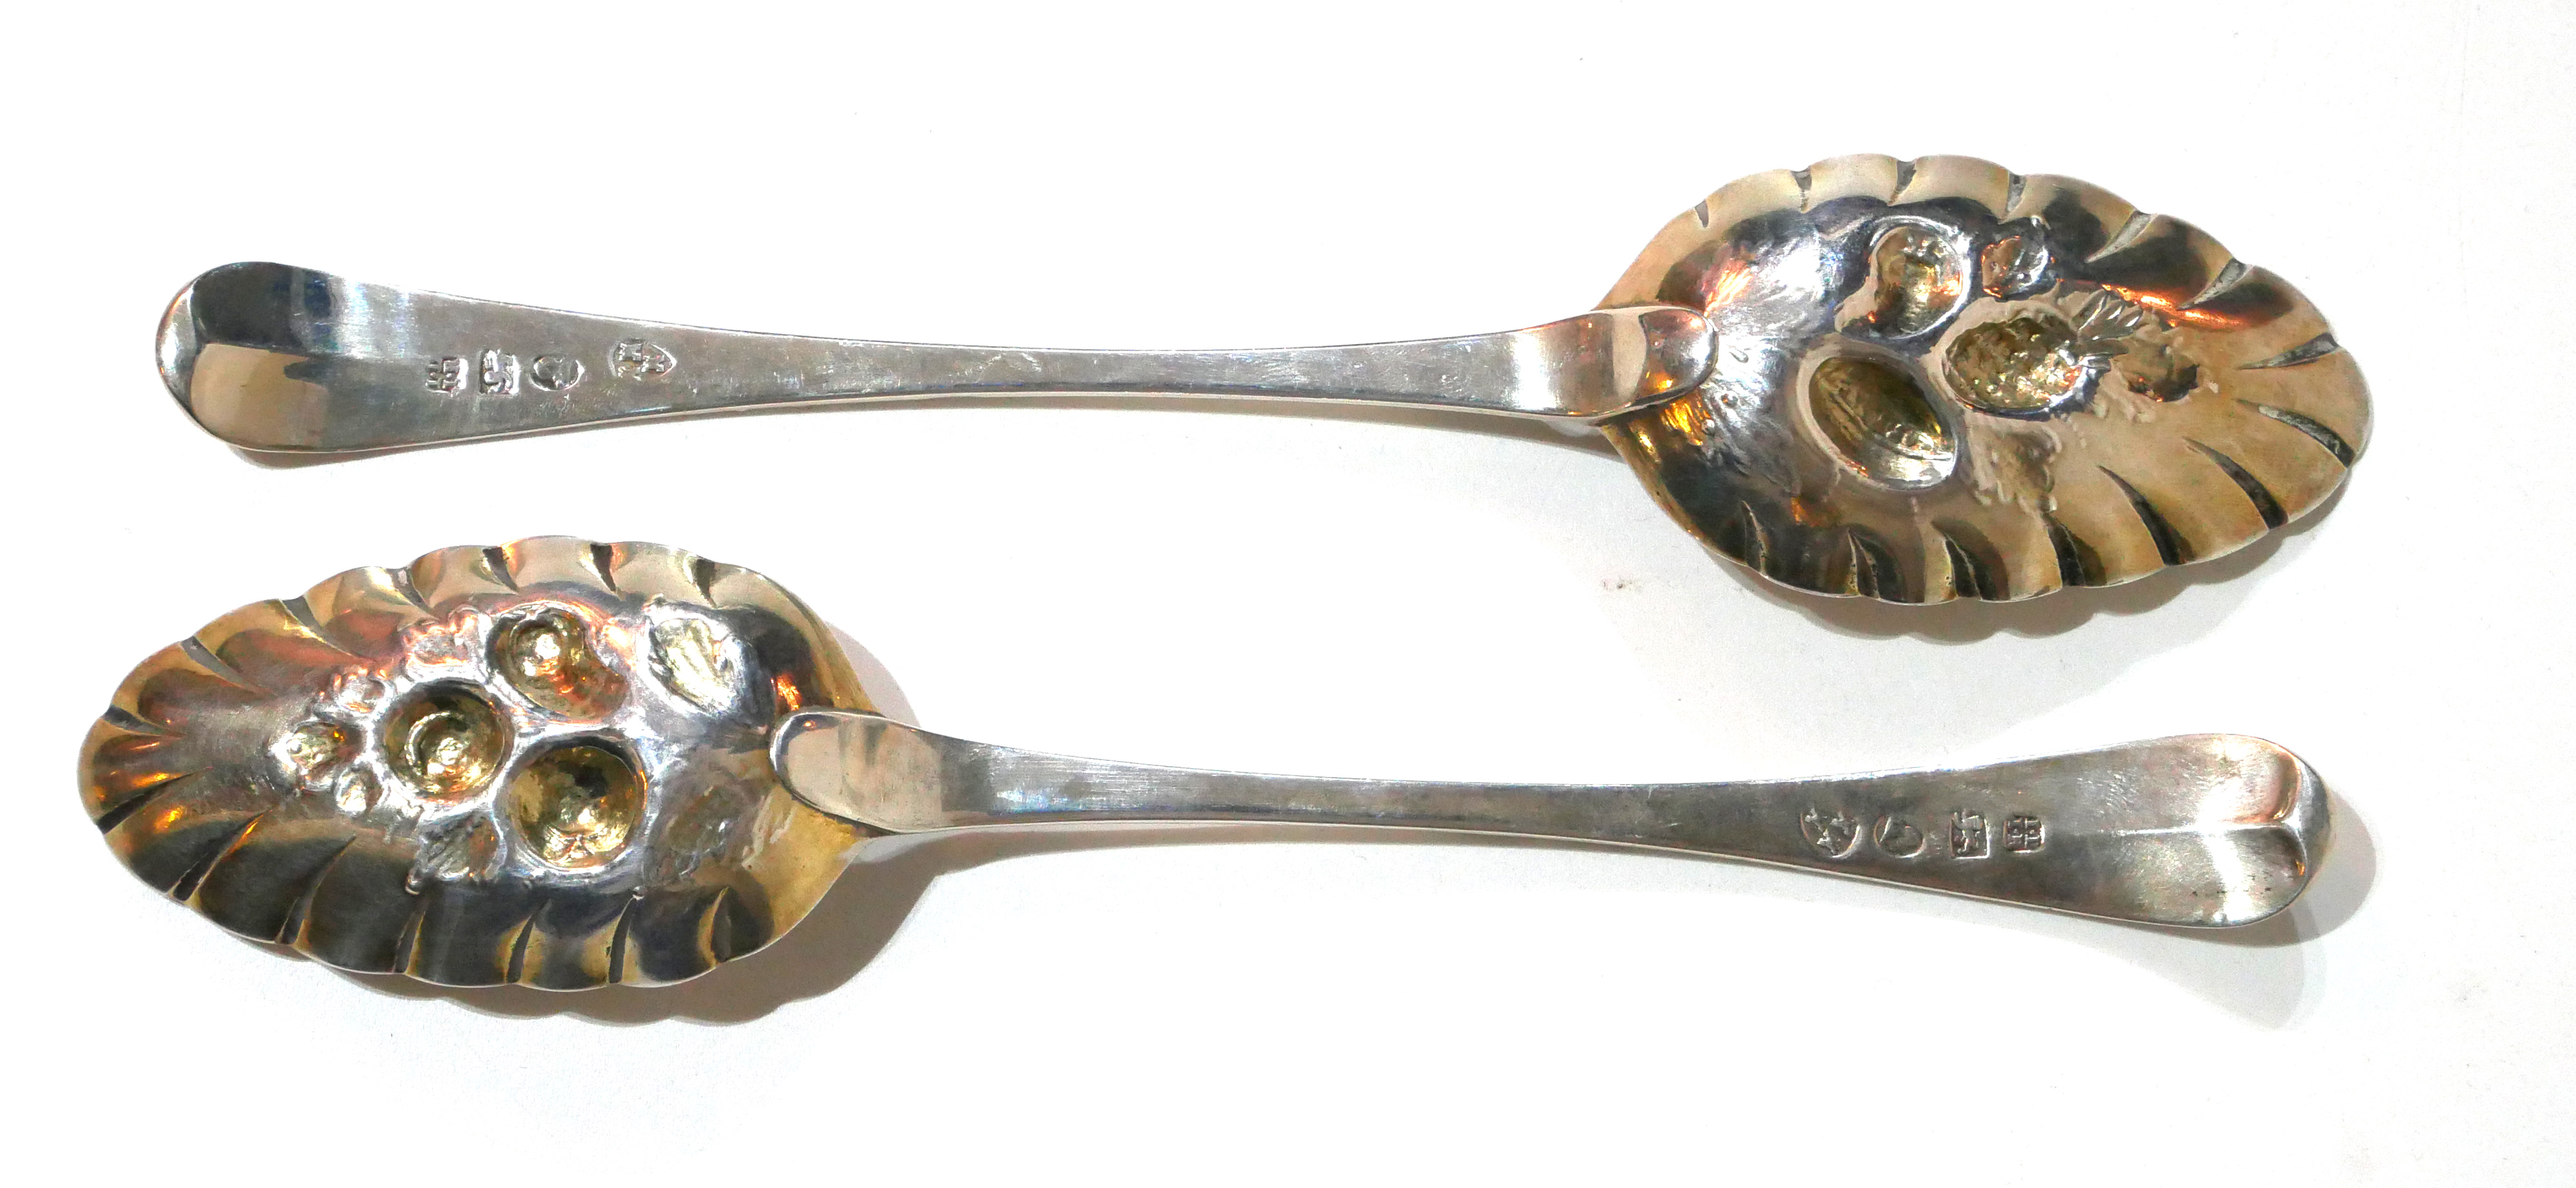 A PAIR OF GEORGIAN NEWCASTLE SILVER BERRY SPOONS Having fine engraved decoration and embossed - Image 2 of 3